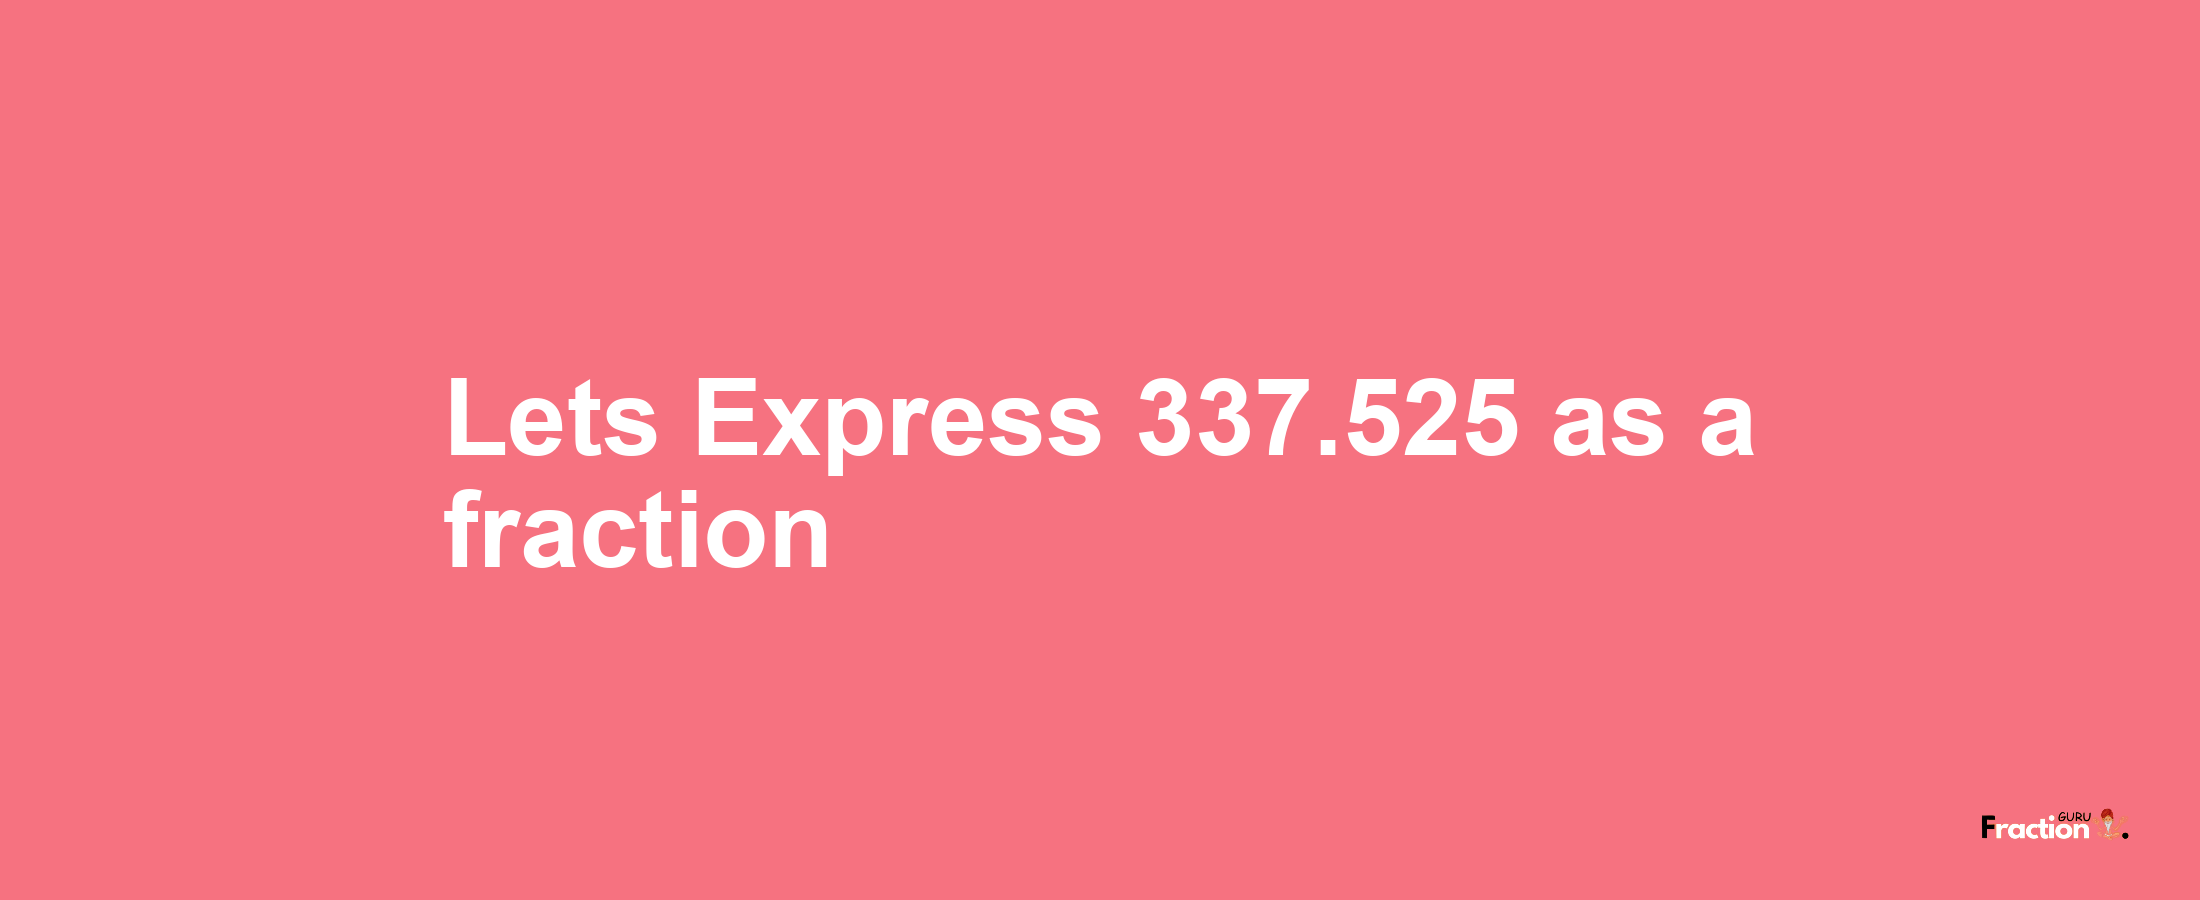 Lets Express 337.525 as afraction